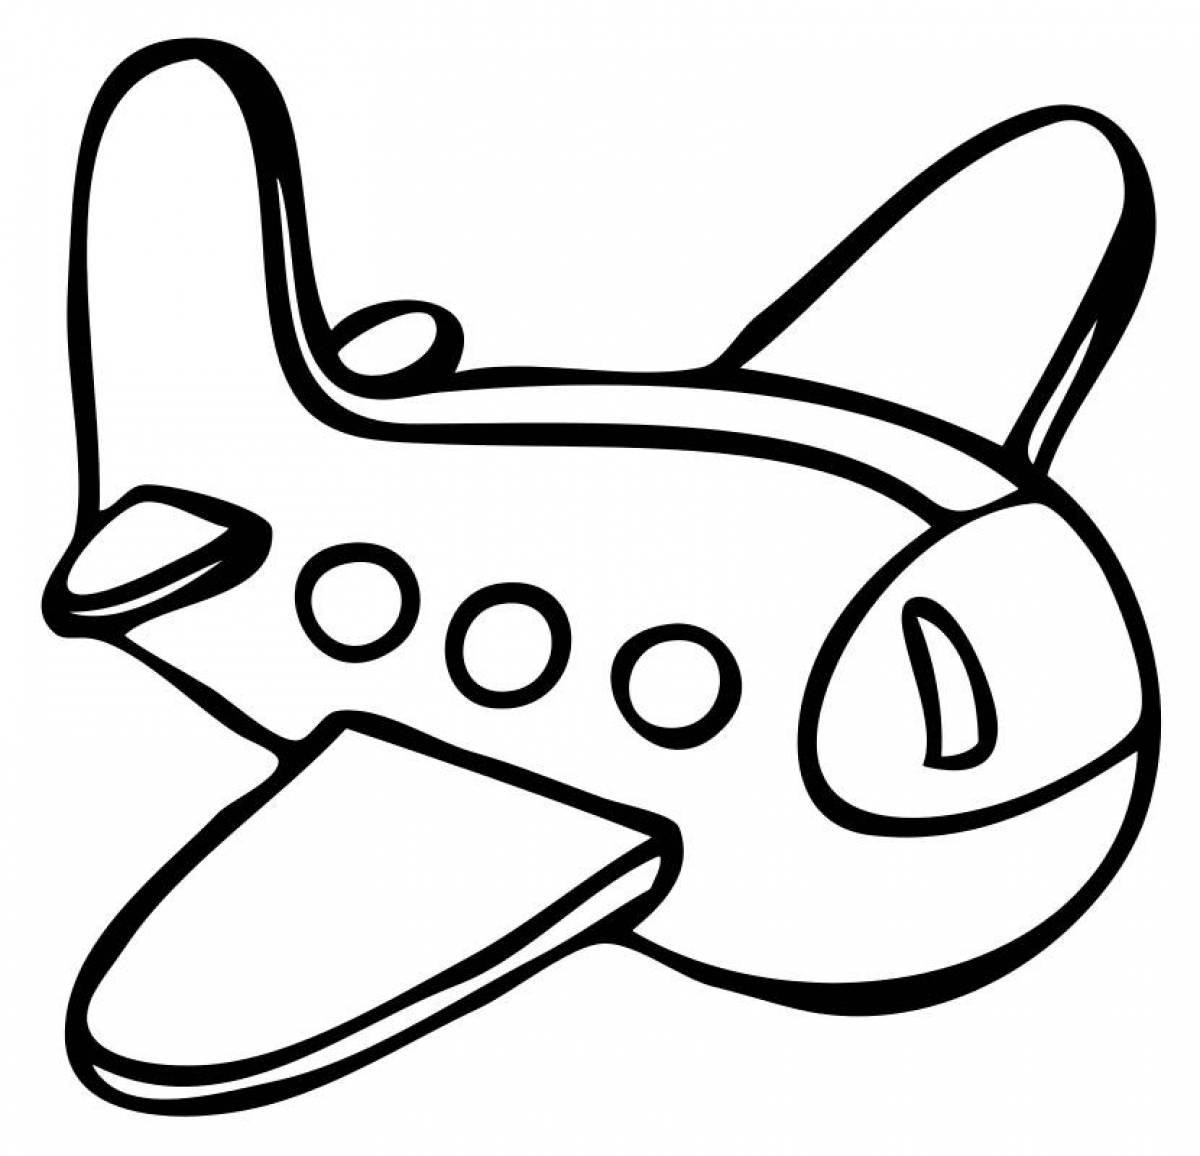 Fun plane coloring for 3-4 year olds